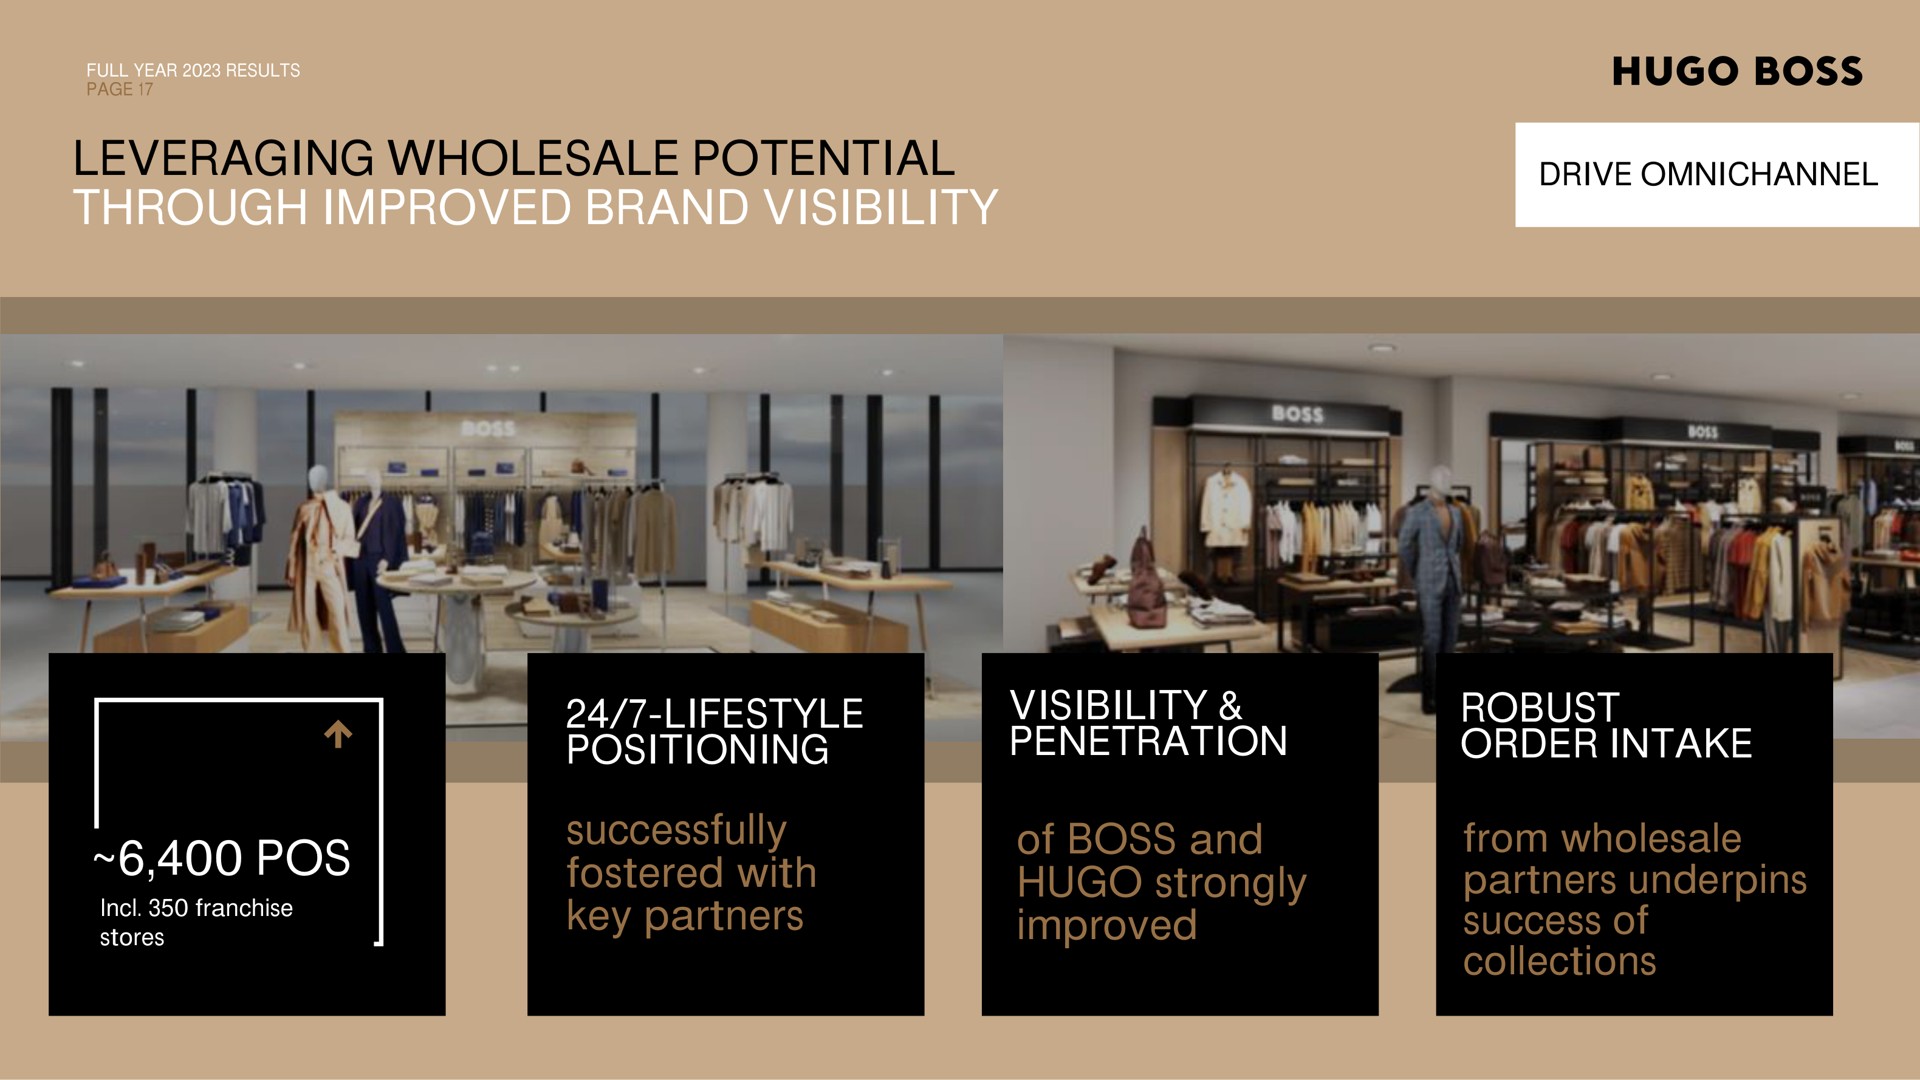 leveraging wholesale potential through improved brand visibility drive pos positioning successfully fostered with key partners visibility penetration robust order intake of boss and strongly improved from wholesale partners underpins success of collections ere nails | Hugo Boss